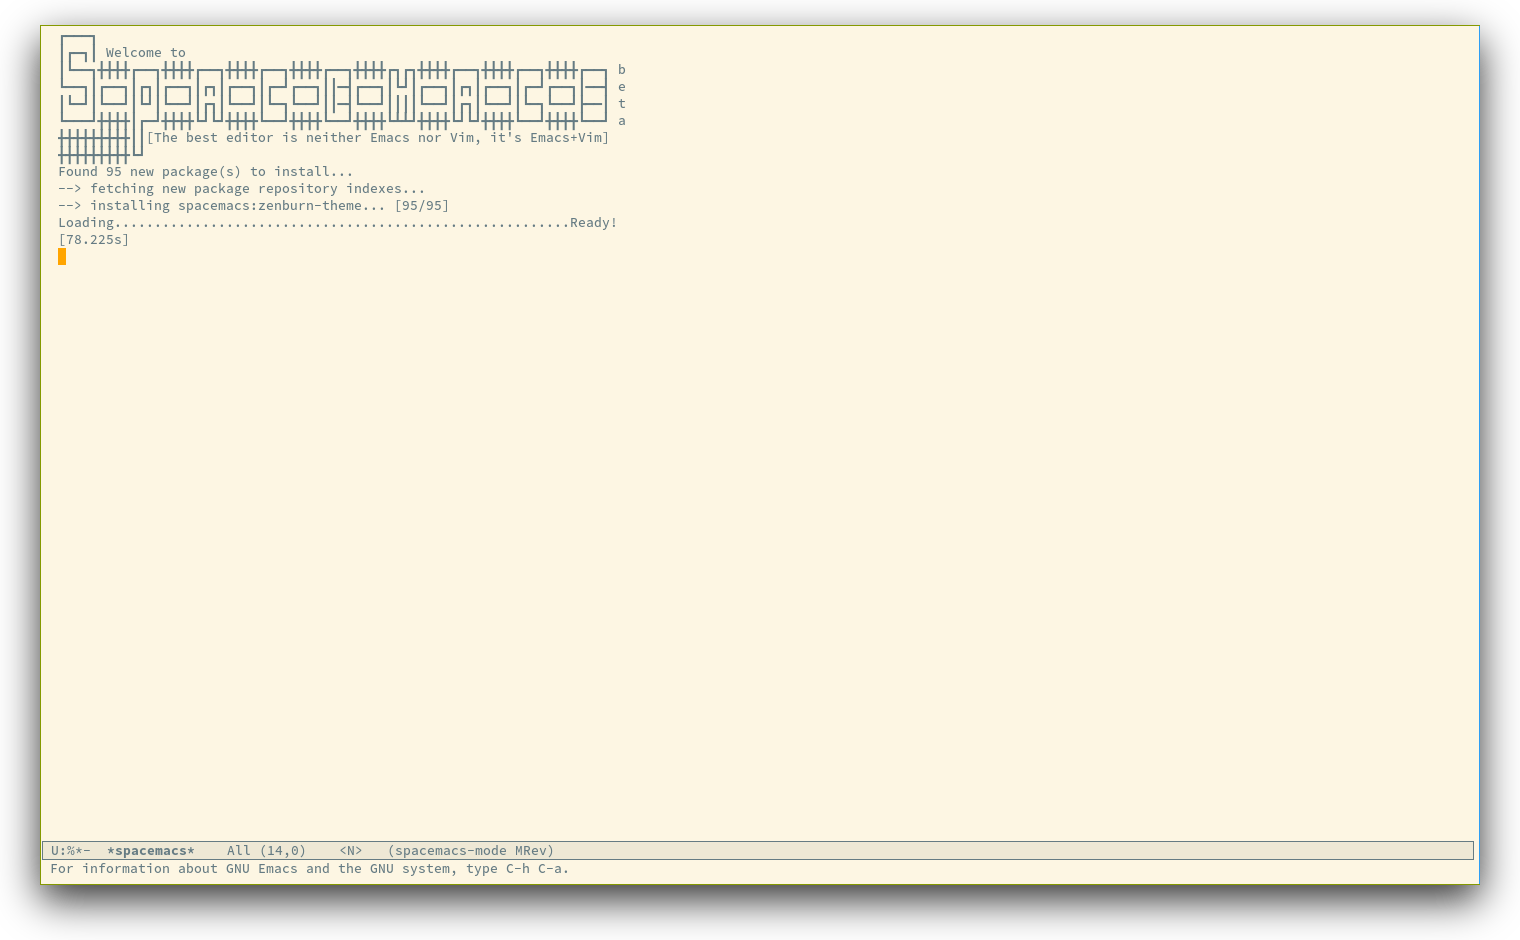 /TakeV/spacemacs/media/commit/d1bb779340fadfe5f1d4cacd716d3d658e4bea76/doc/img/spacemacs-startup.png